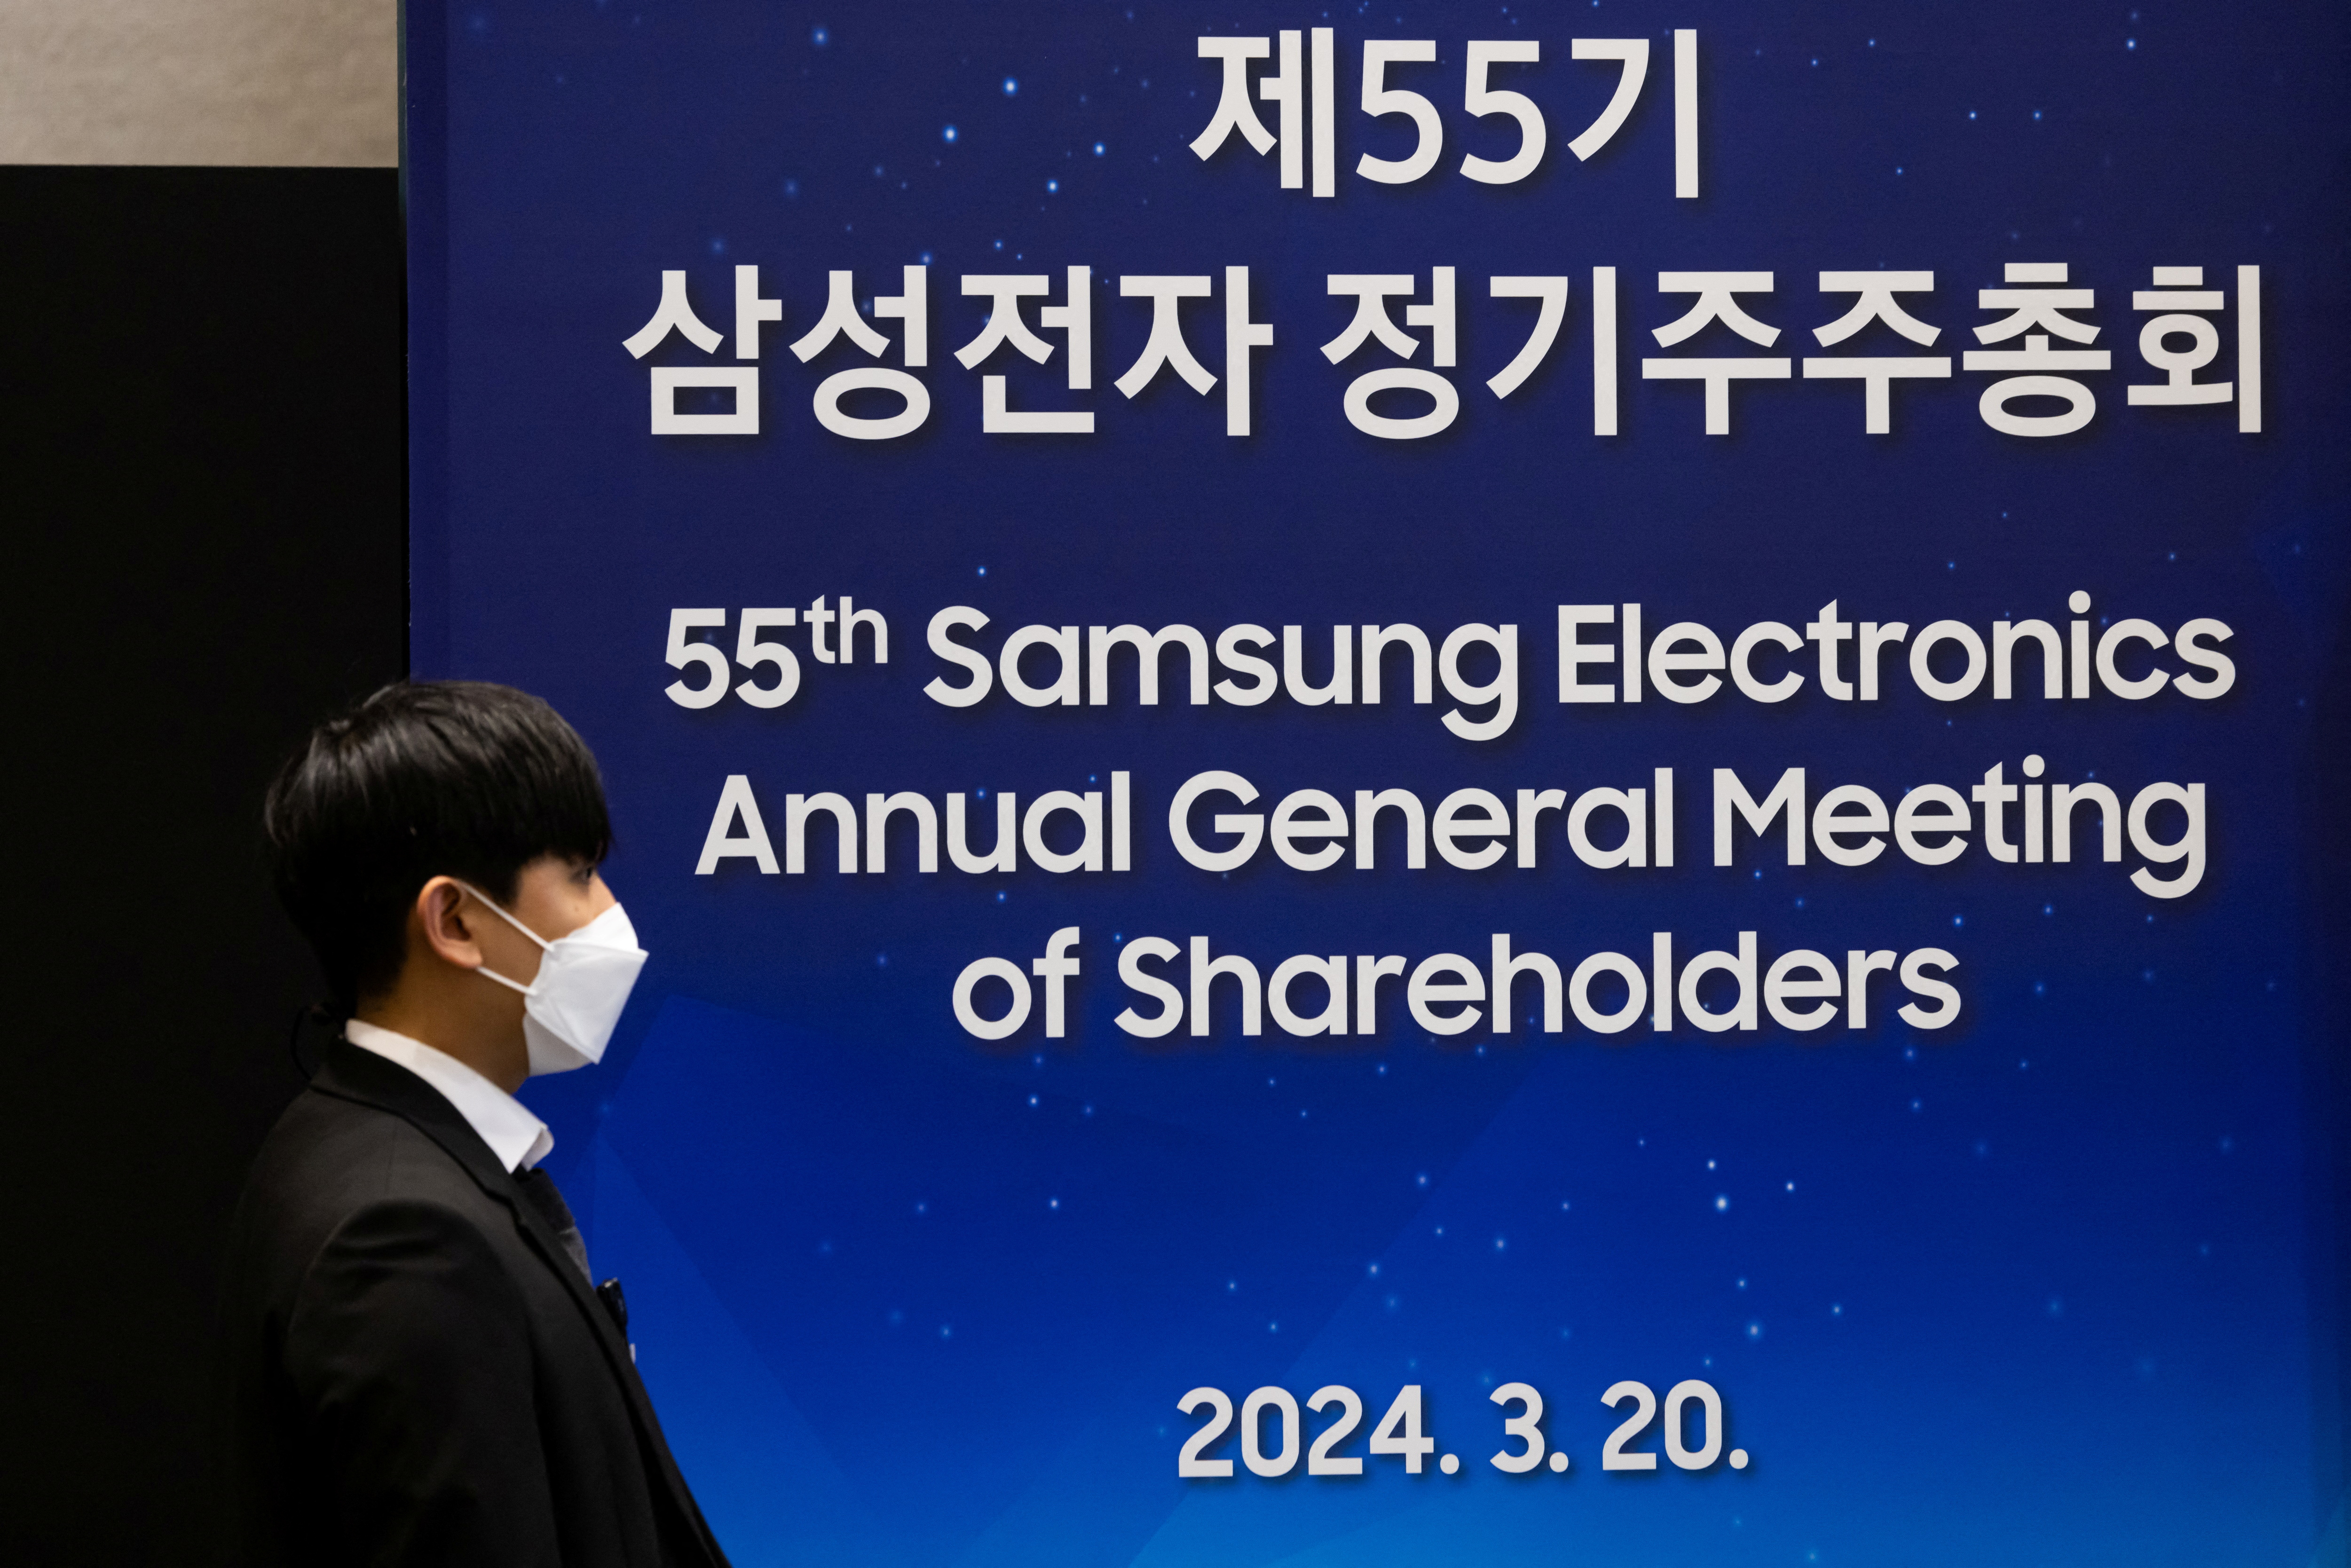 Samsung Electronics Co. Annual General Meeting in Suwon